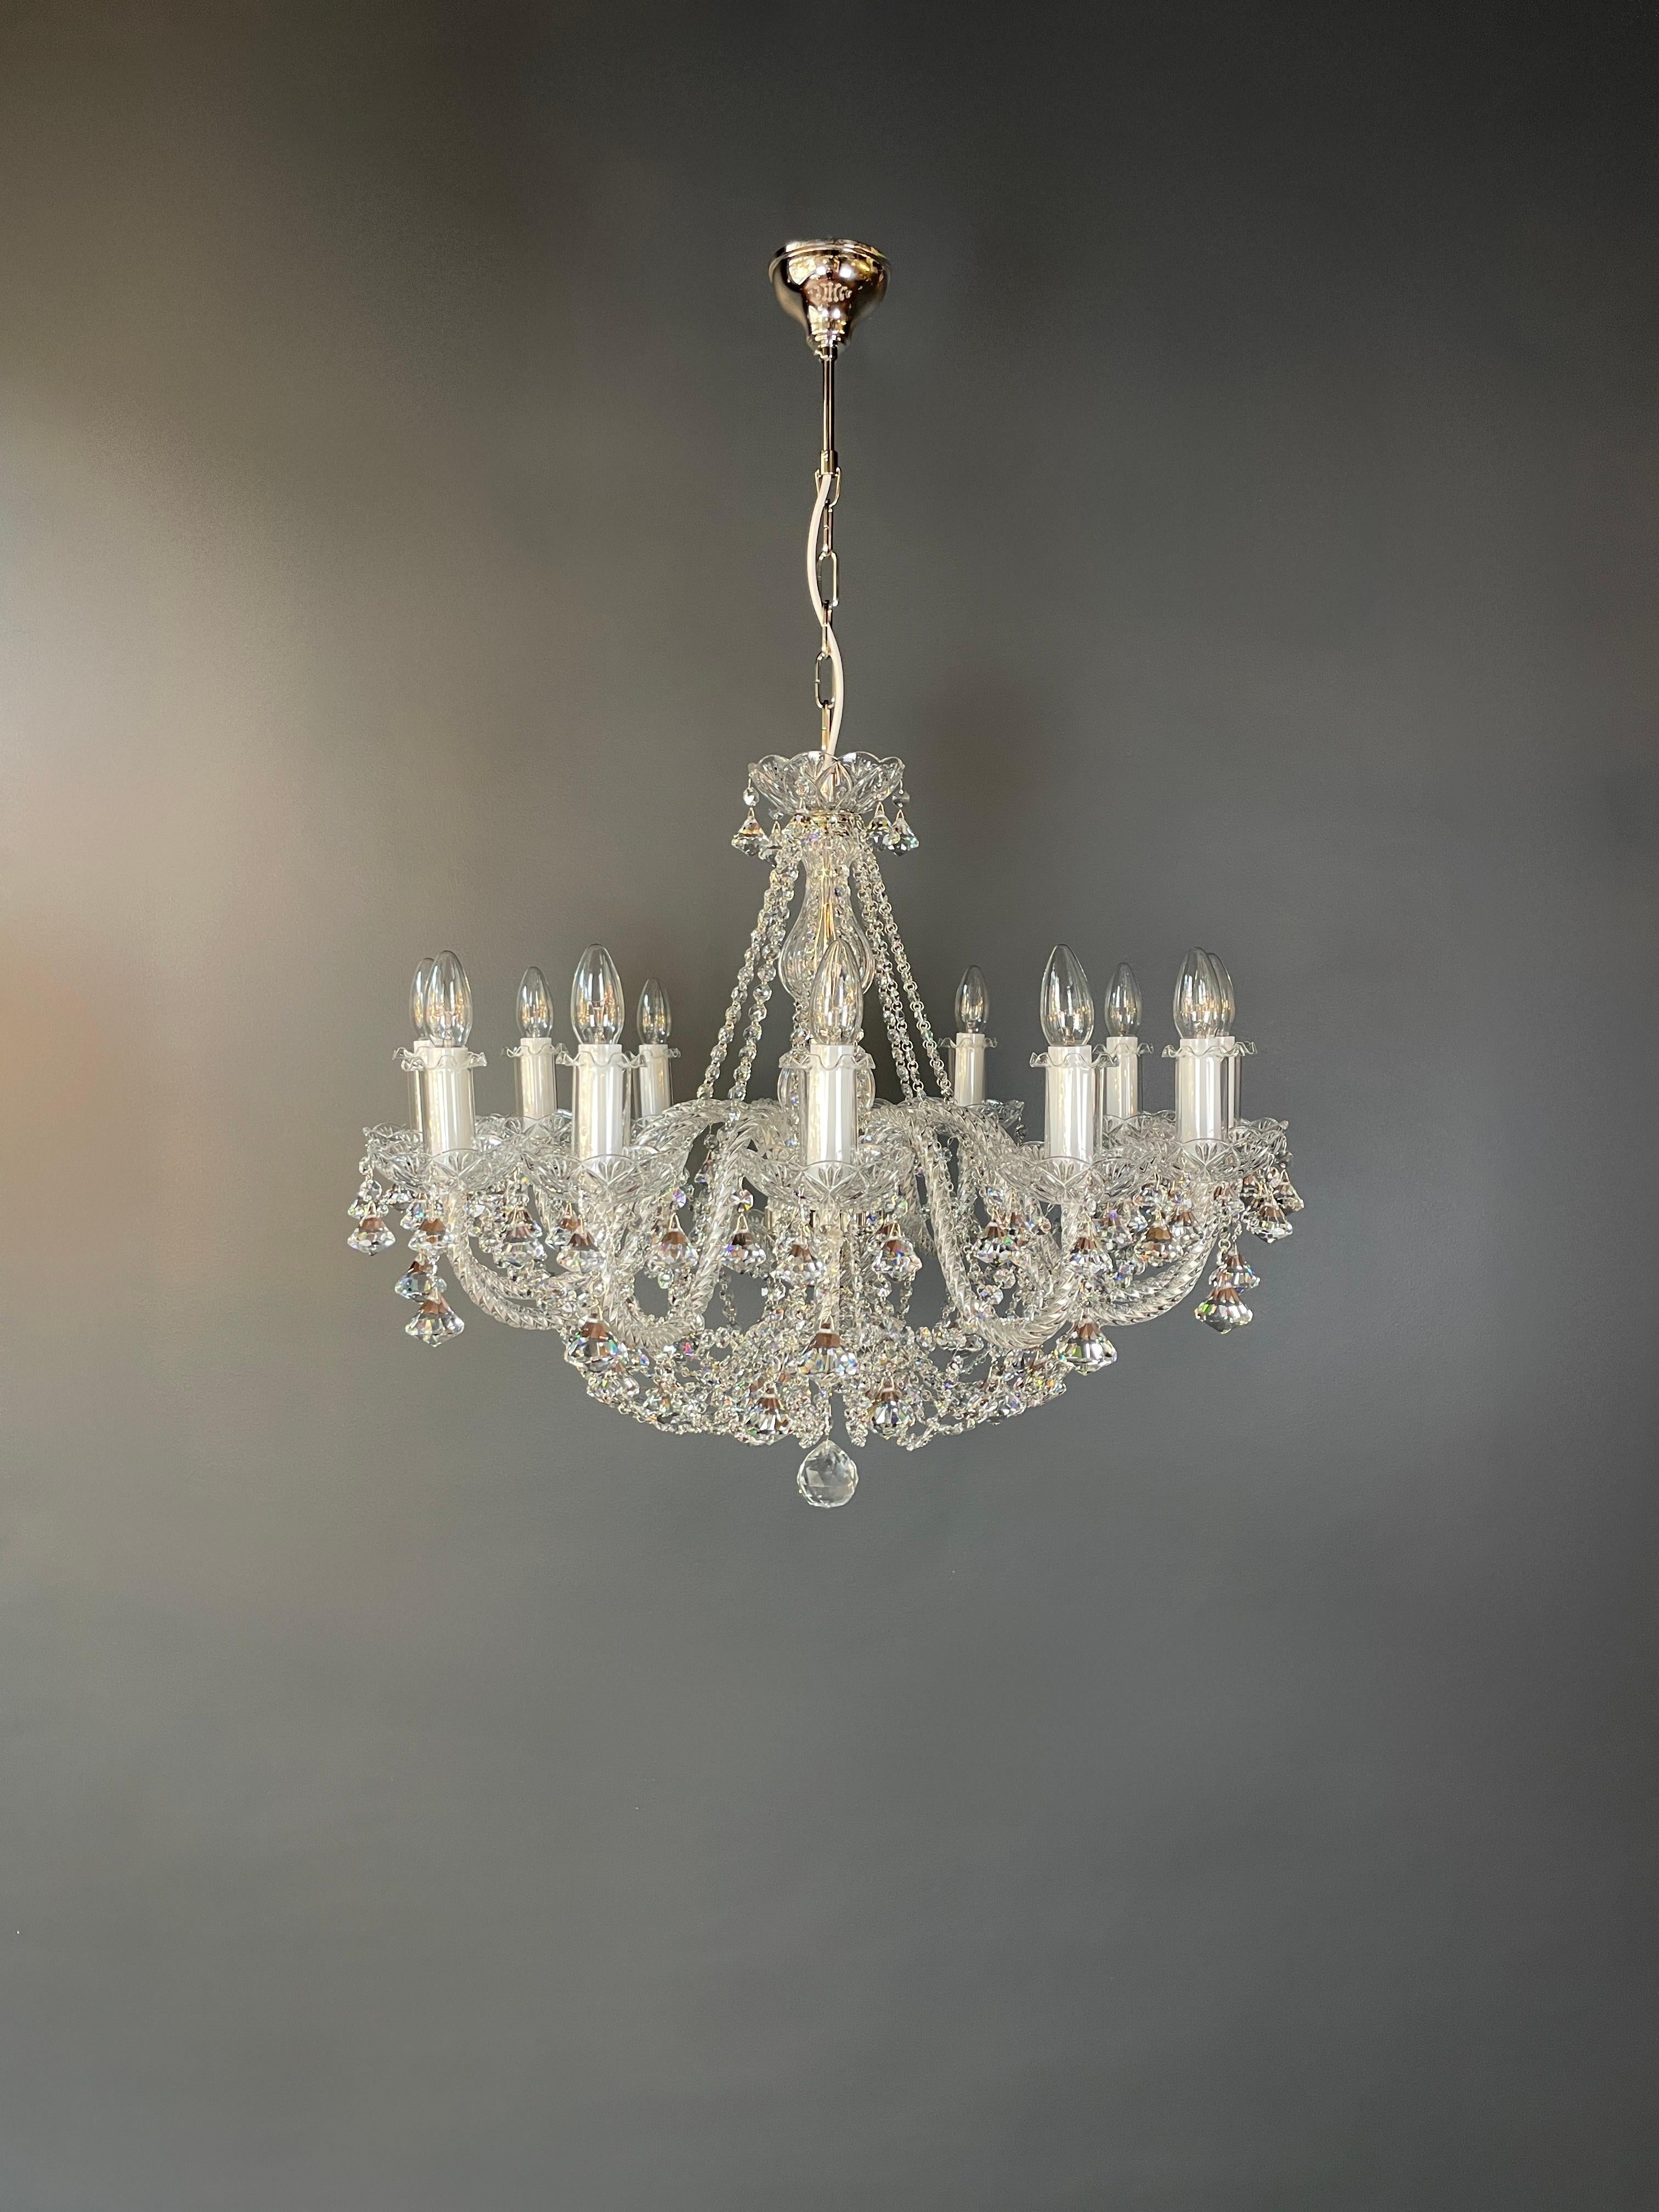 Introducing our stunning bohemian-style chandelier! This brand new in-house production has been meticulously crafted with great attention to detail, resulting in a neutral and airy centerpiece for any space that maintains its classic chandelier